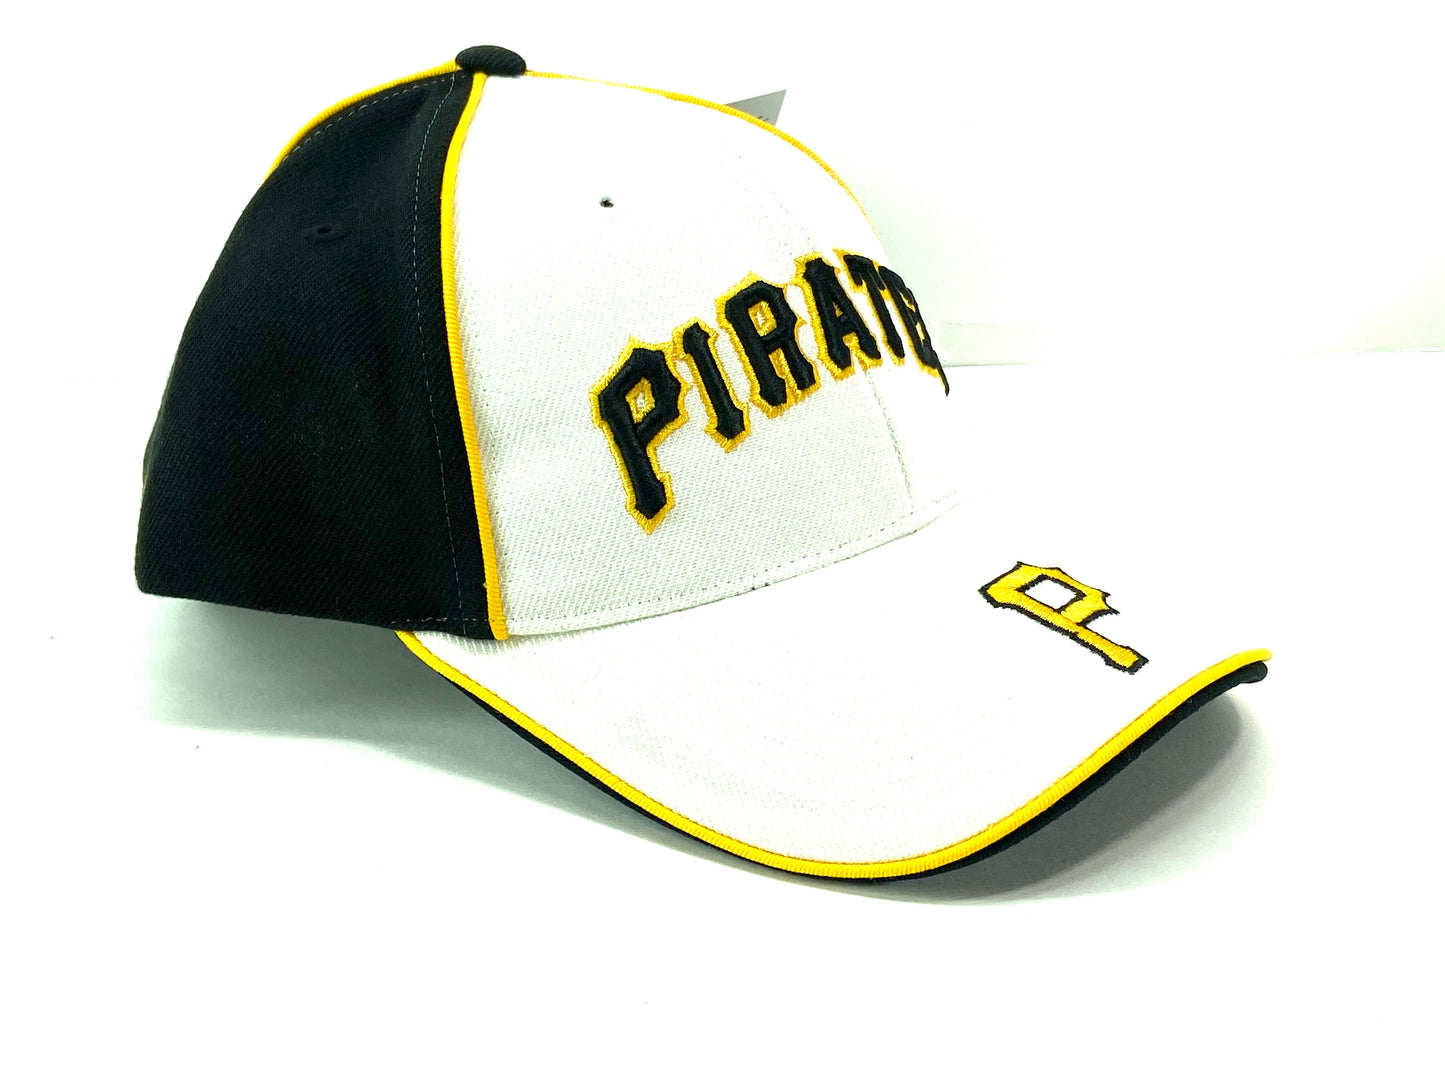 Pittsburgh Pirates Vintage MLB "Clubhouse" 20% Wool Hat by Drew Pearson